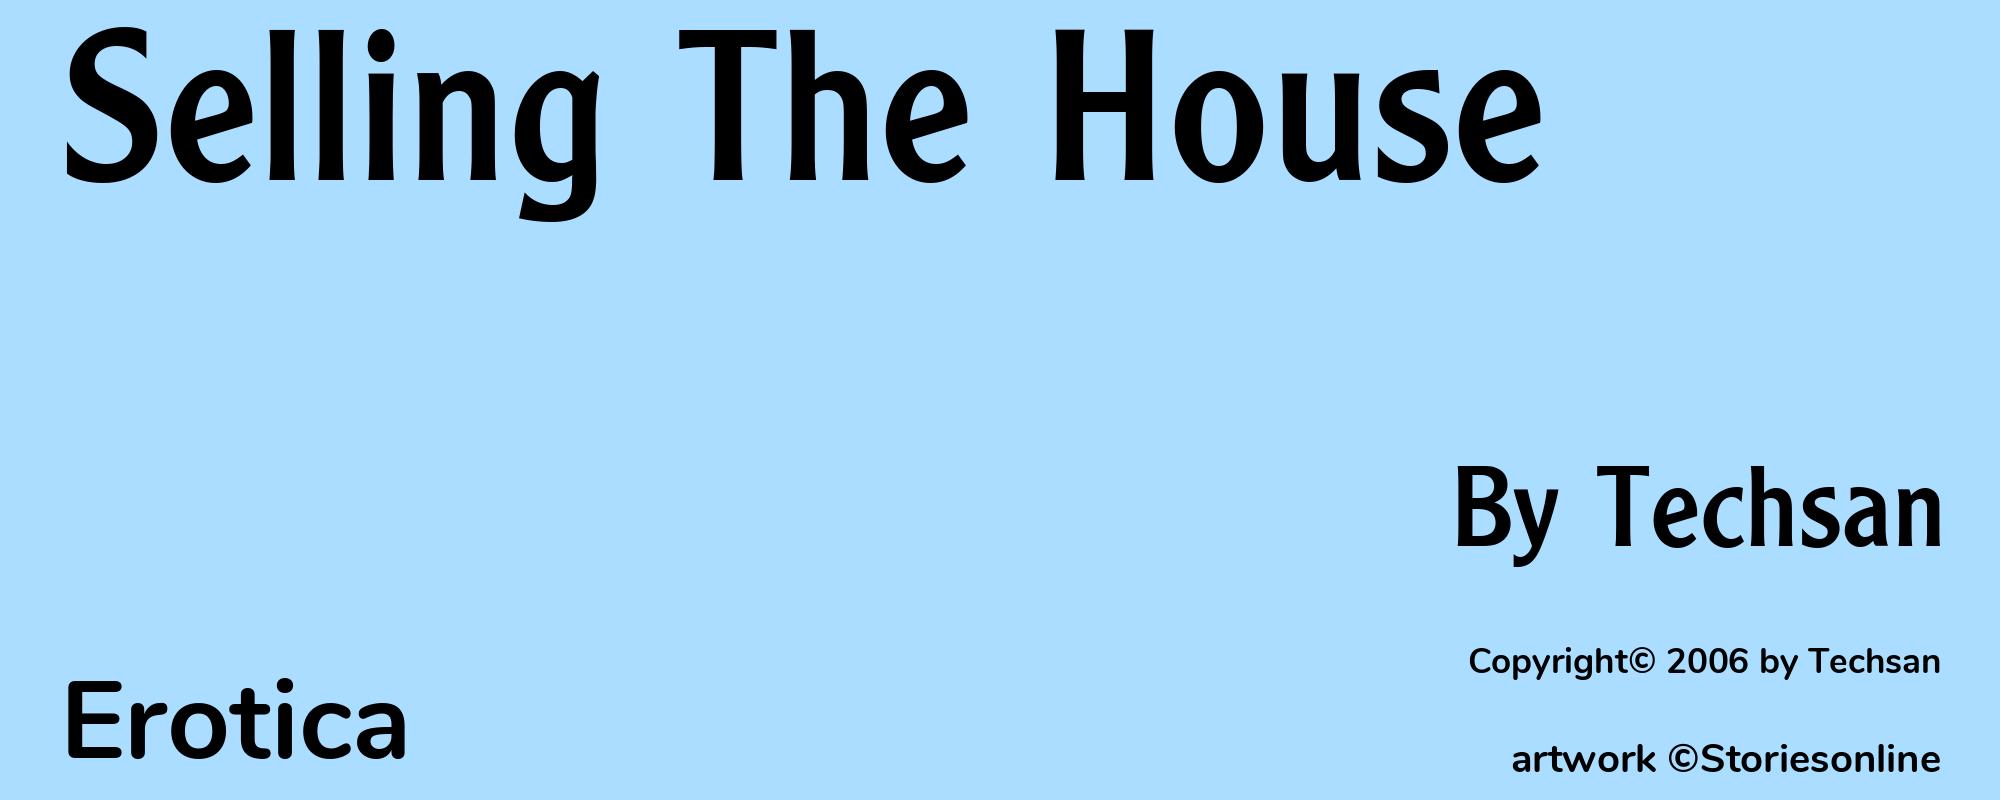 Selling The House - Cover